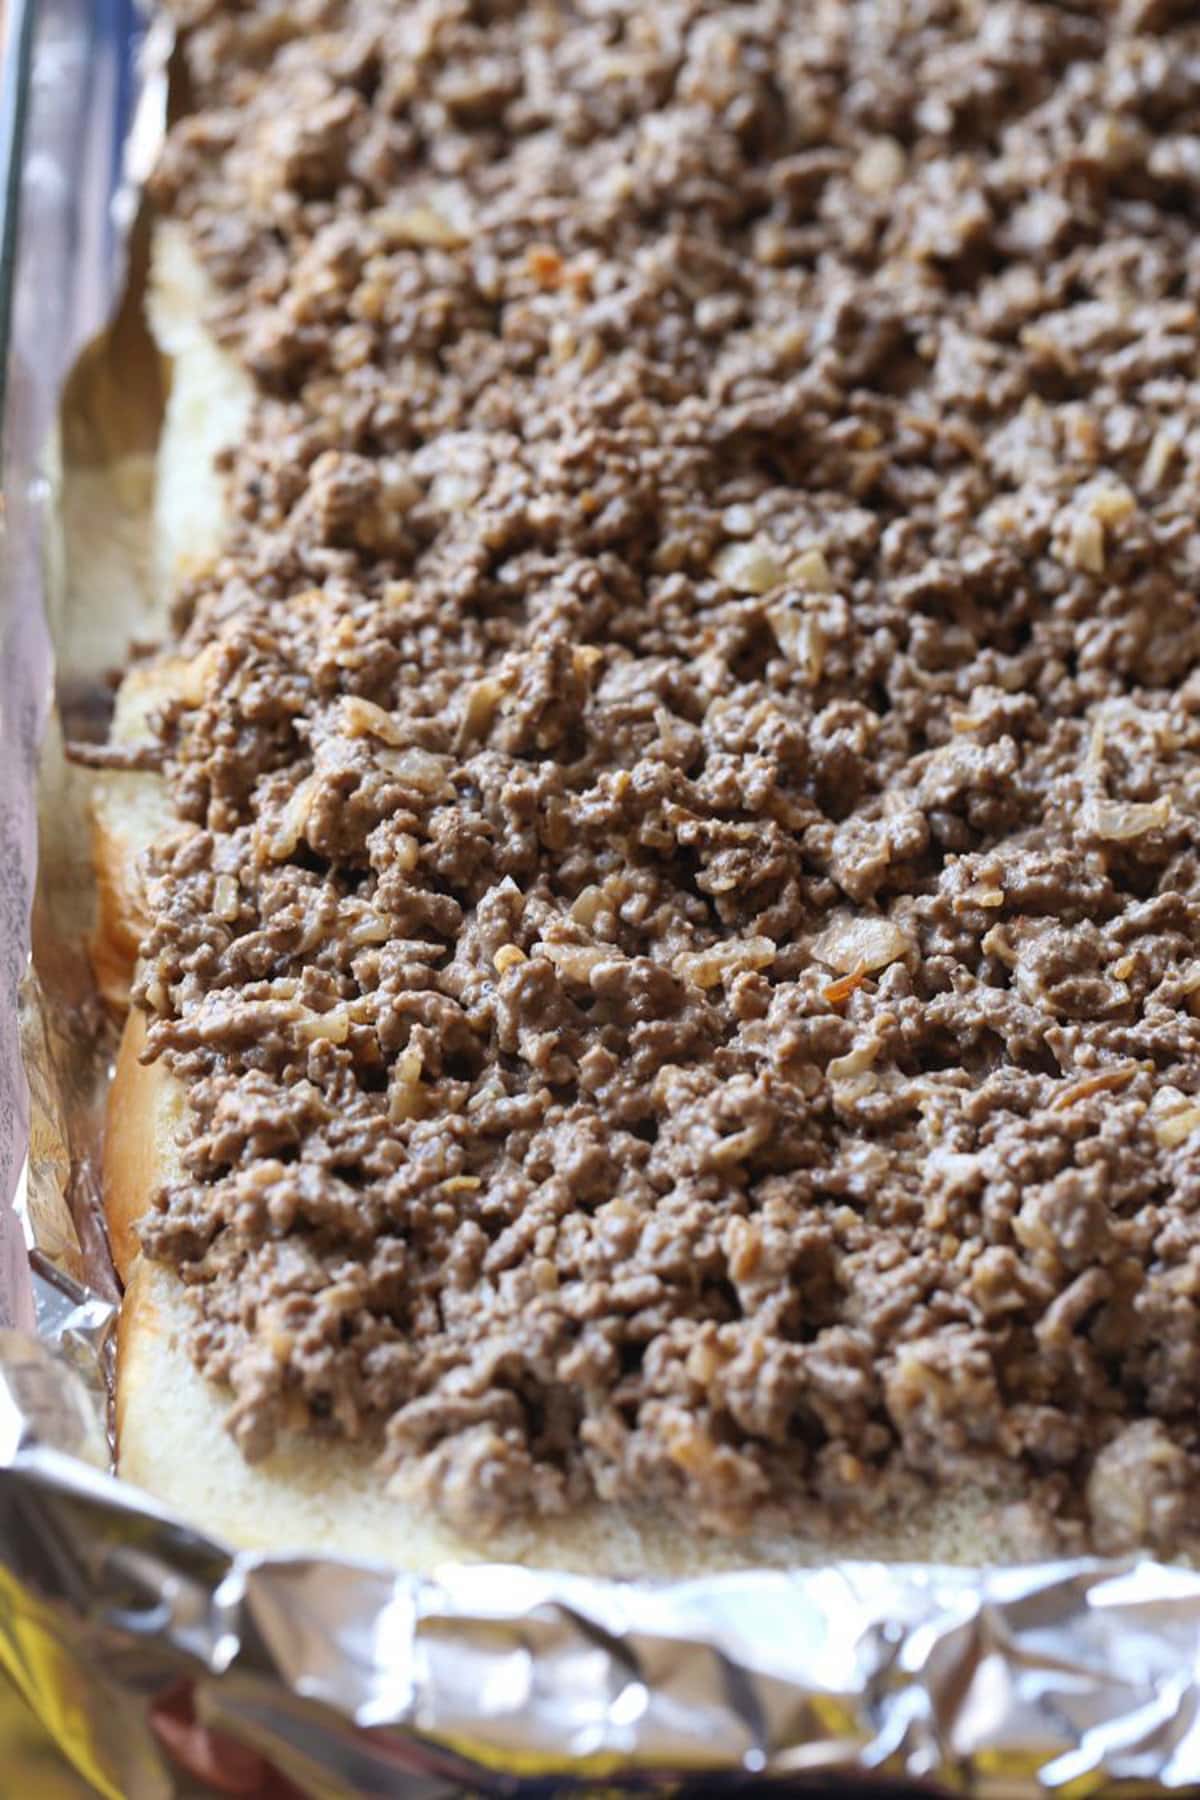 Ground beef is ready to have cheese placed on top.